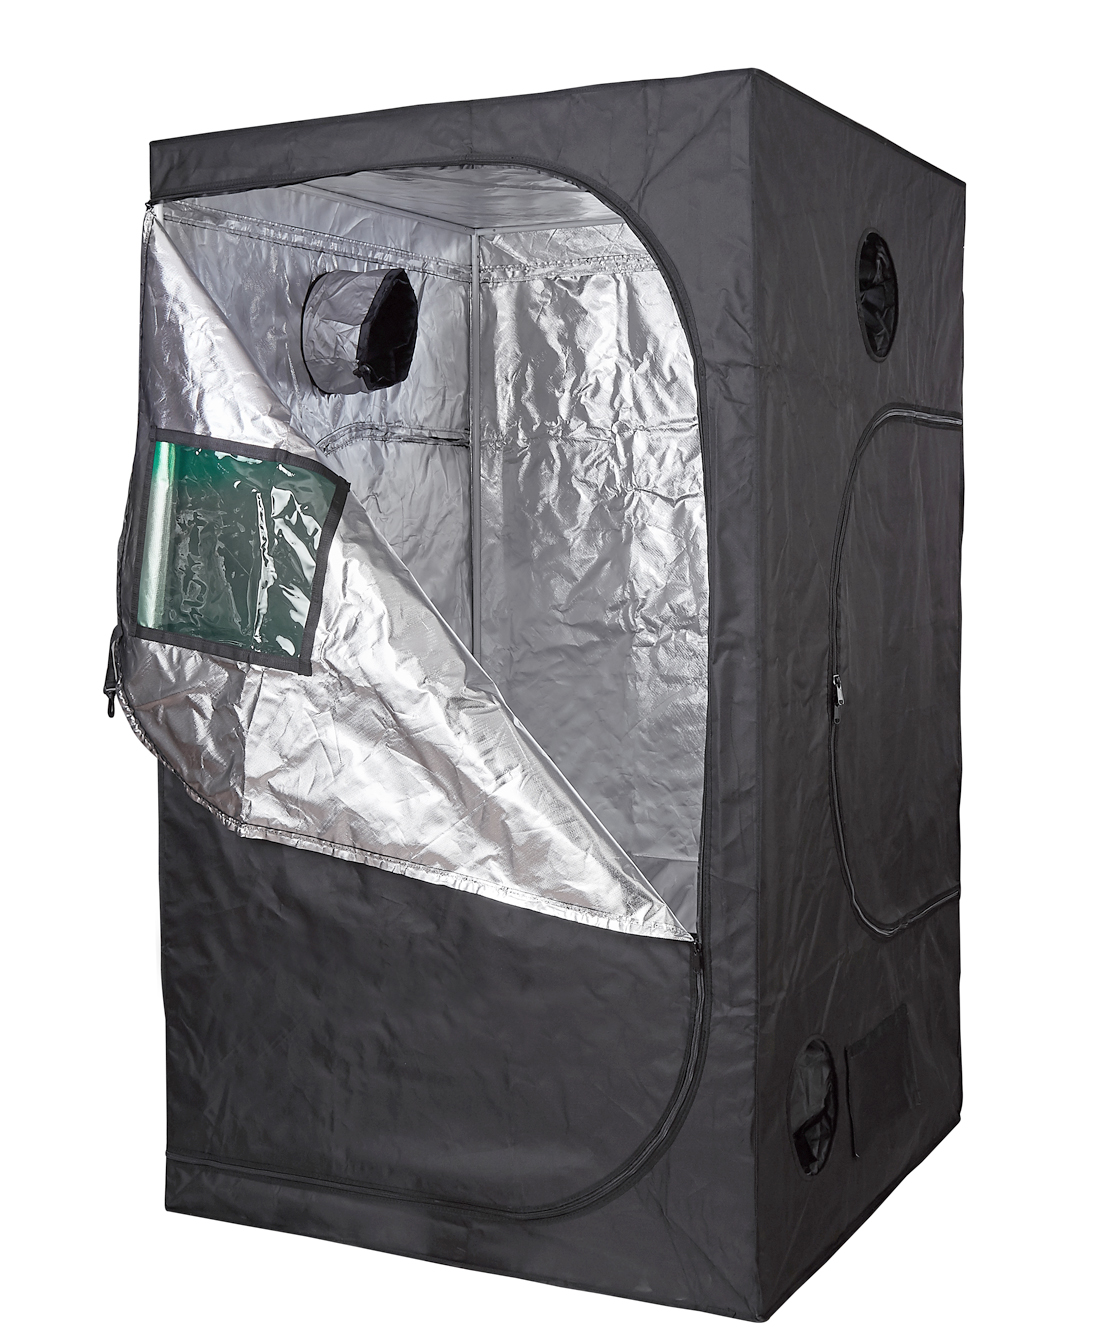 GROWERBASICS HORTICULTURAL TENT 4\' X 4\' X 6.6\' / 120X120X200 --19MM POLE